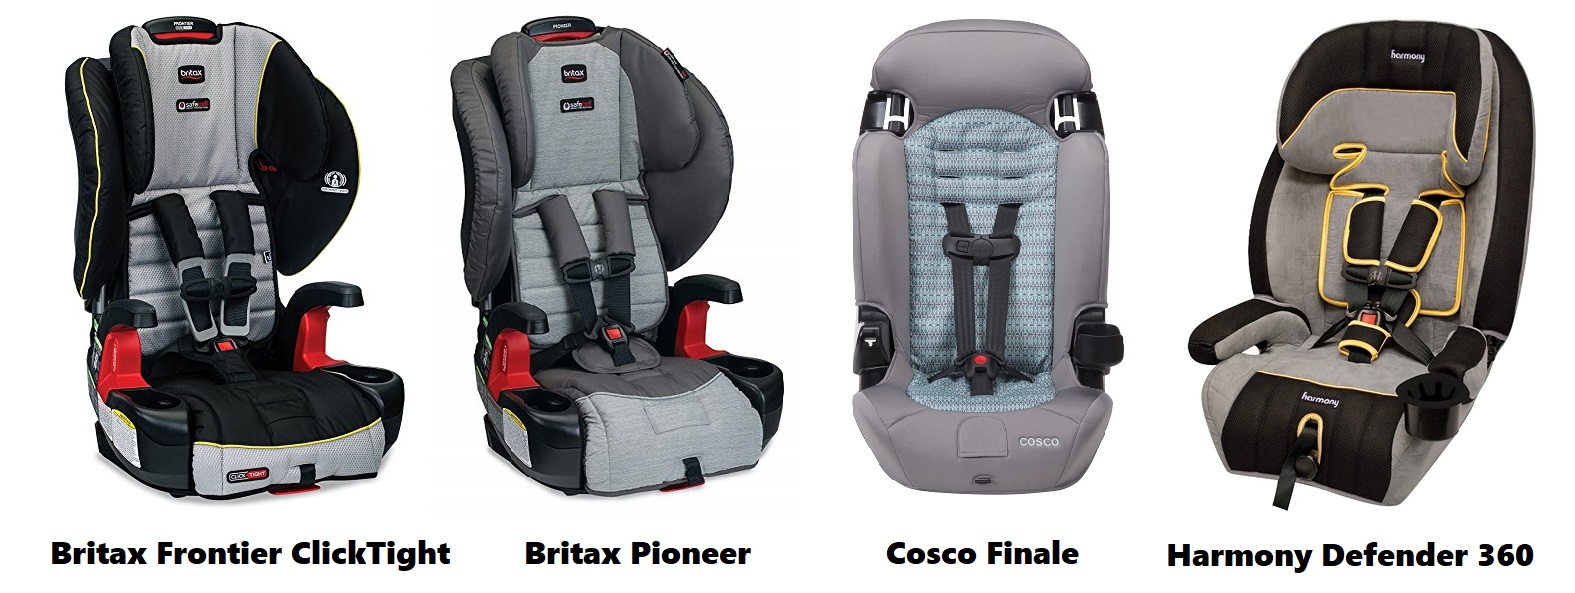 consumer reports car seat stroller combo